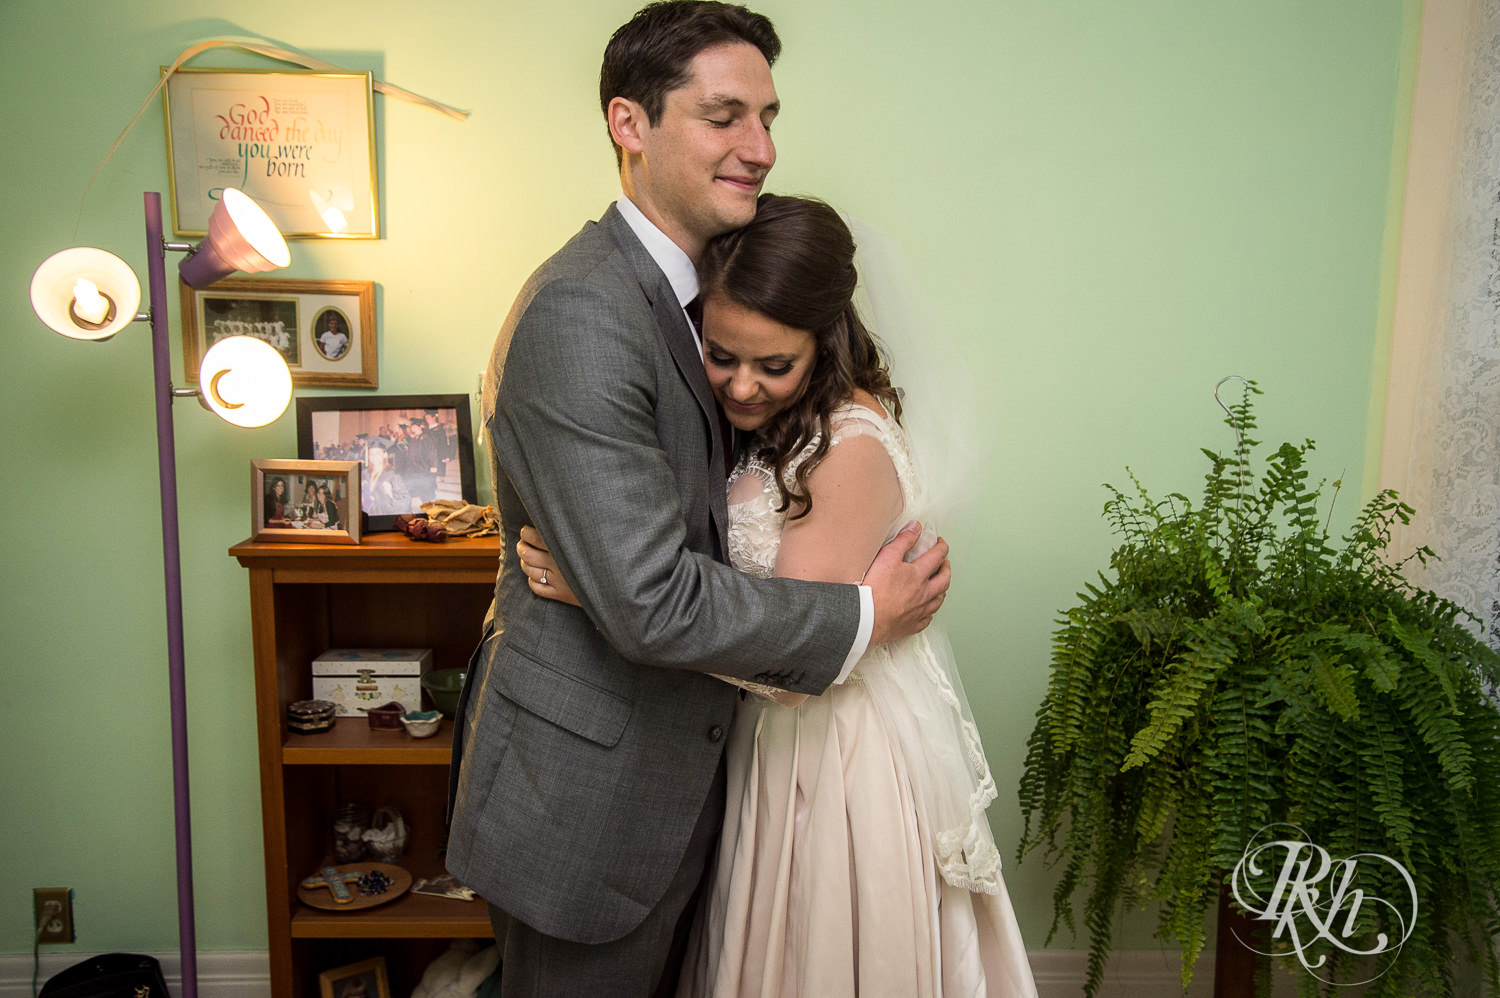 Groom and bride do first look on her wedding day in her childhood home in Saint Paul, Minnesota.